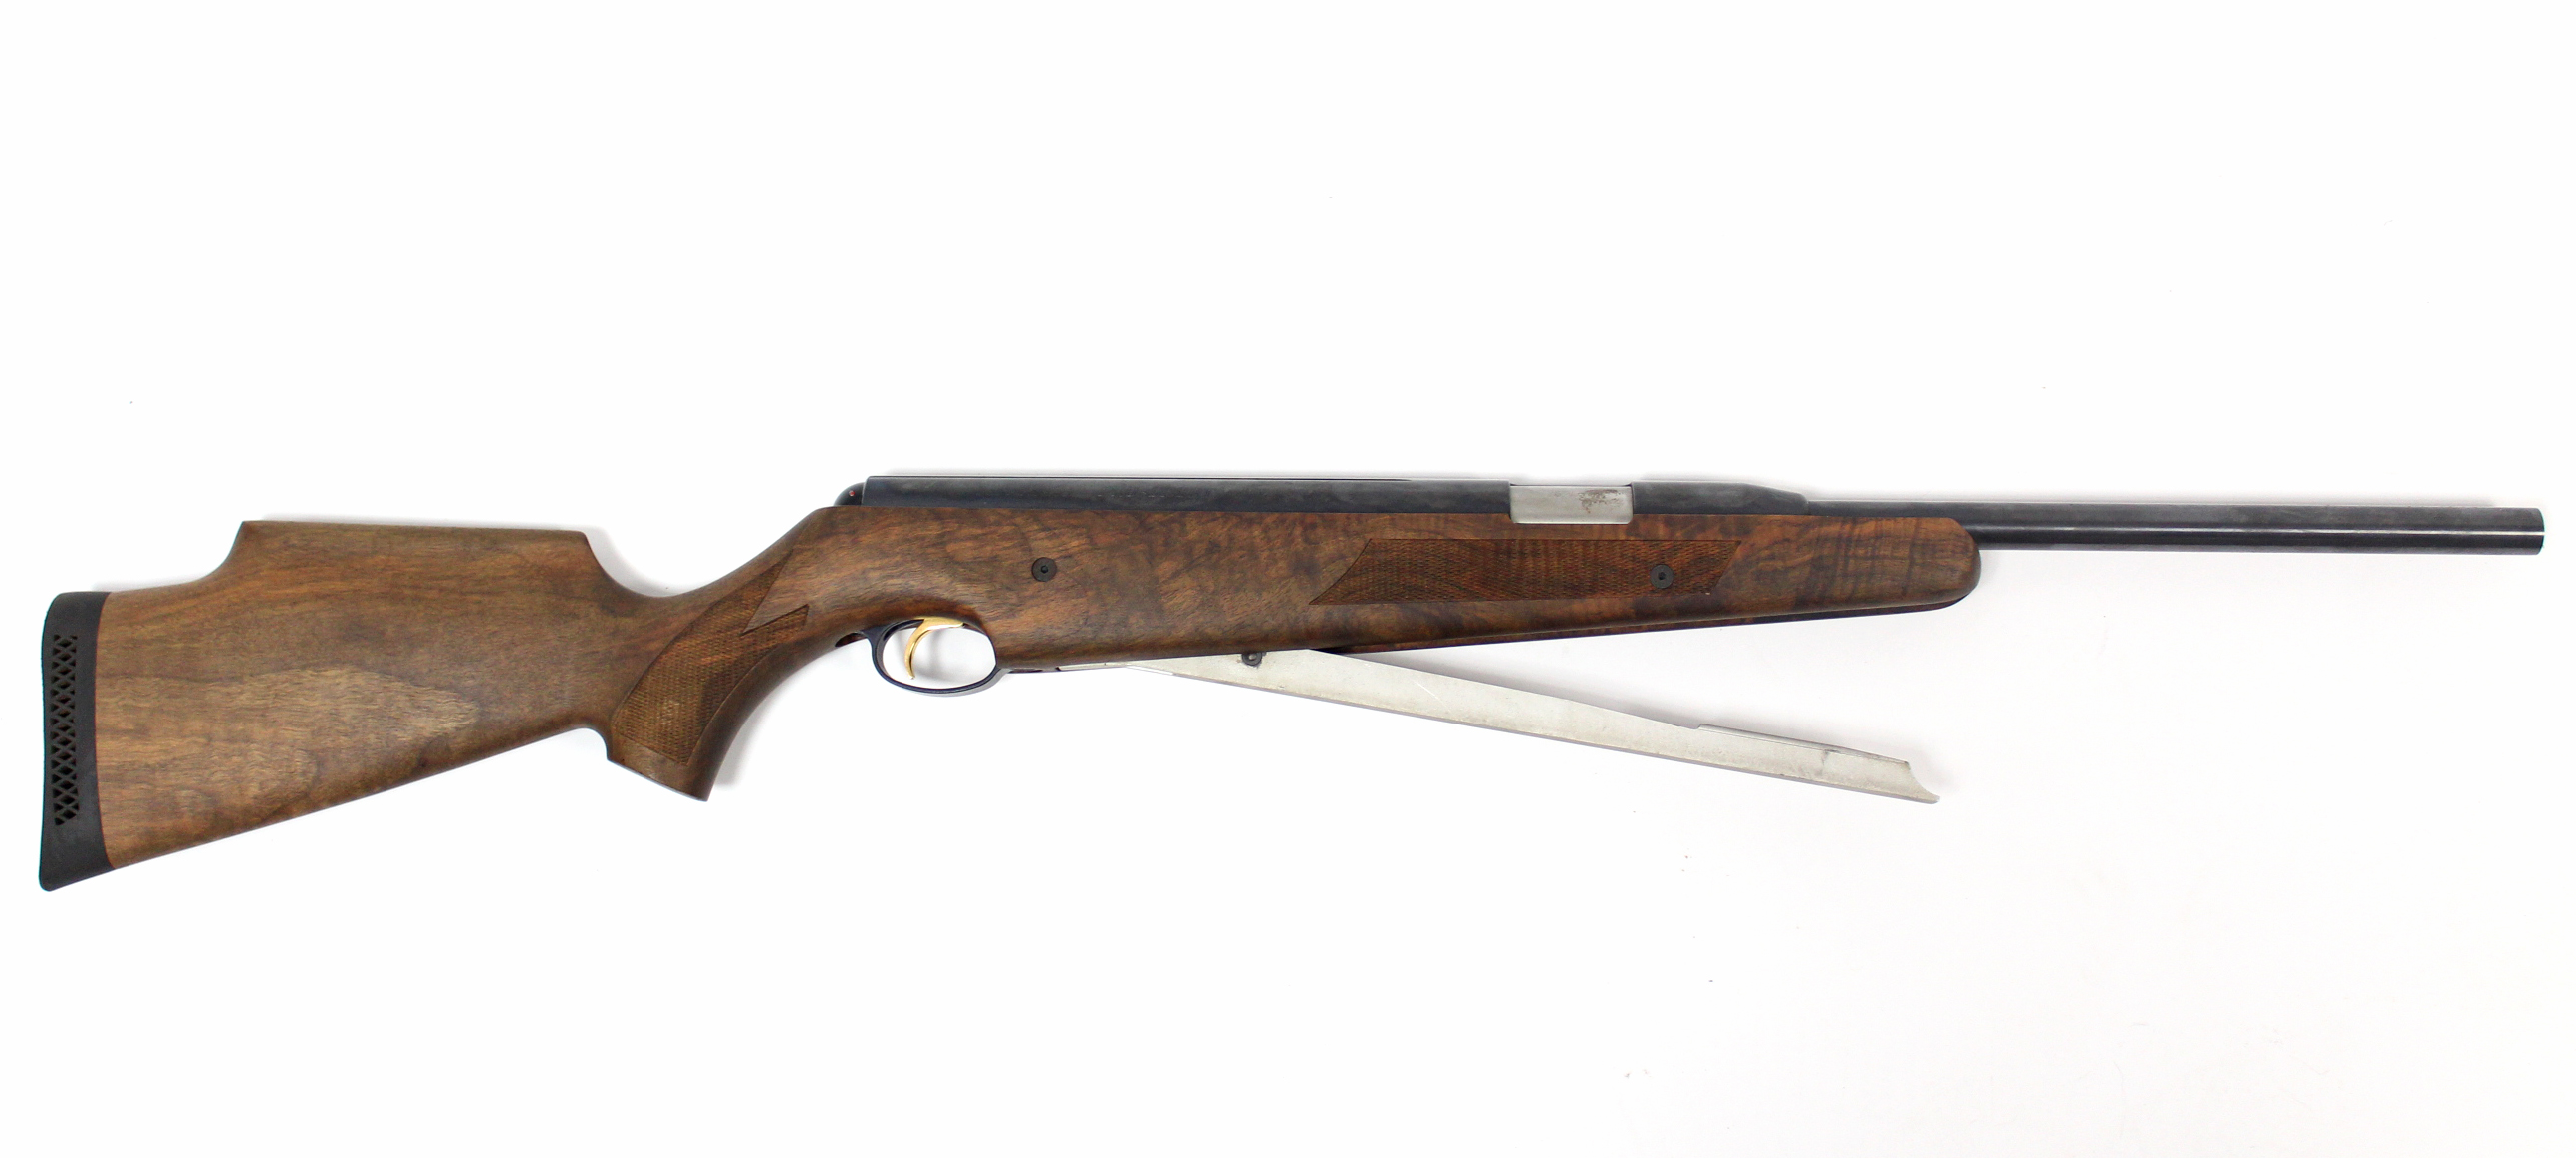 An Air Arms “Pro-Sport” air rifle (calibre not specified).